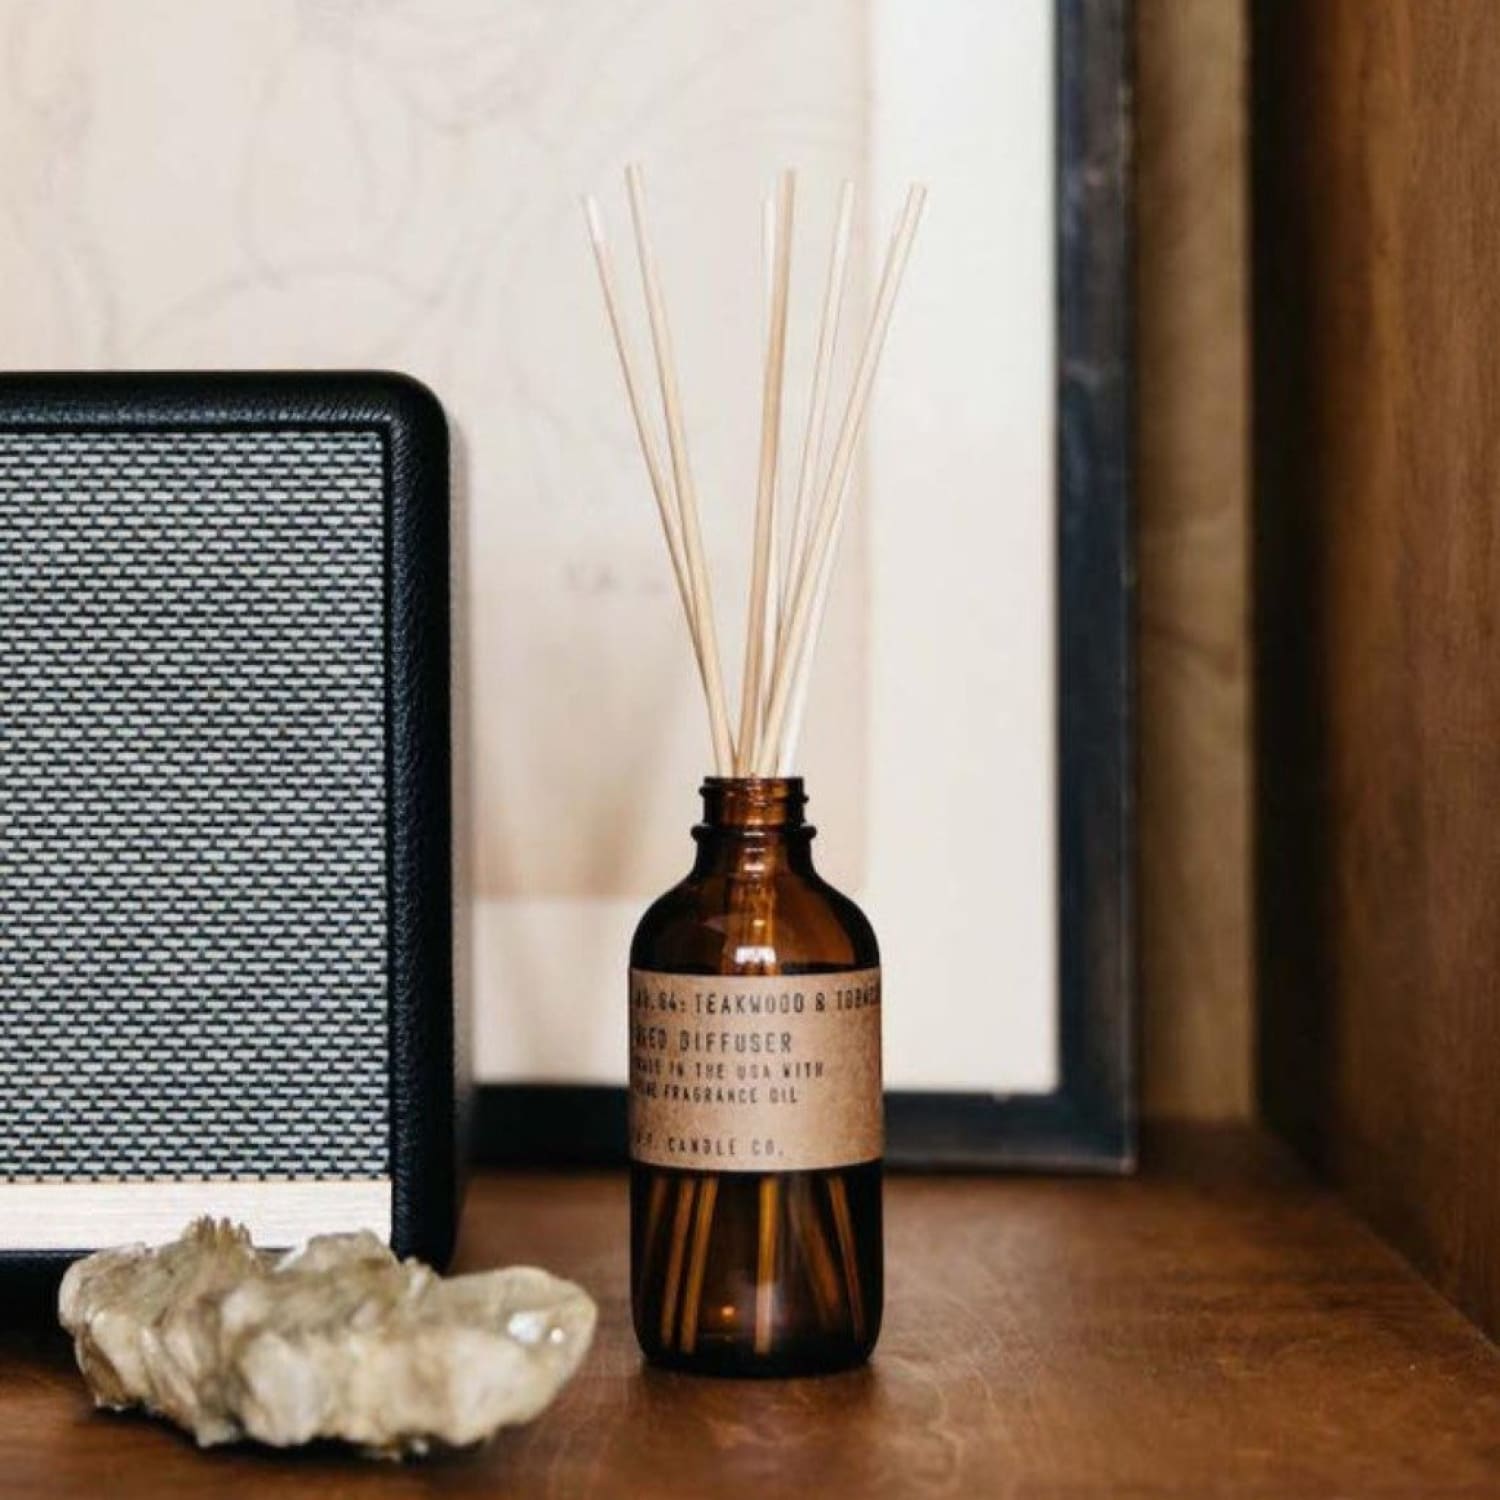 P.f. Candle Co. Reed Diffuser - Teakwood & Tobacco Candles, 